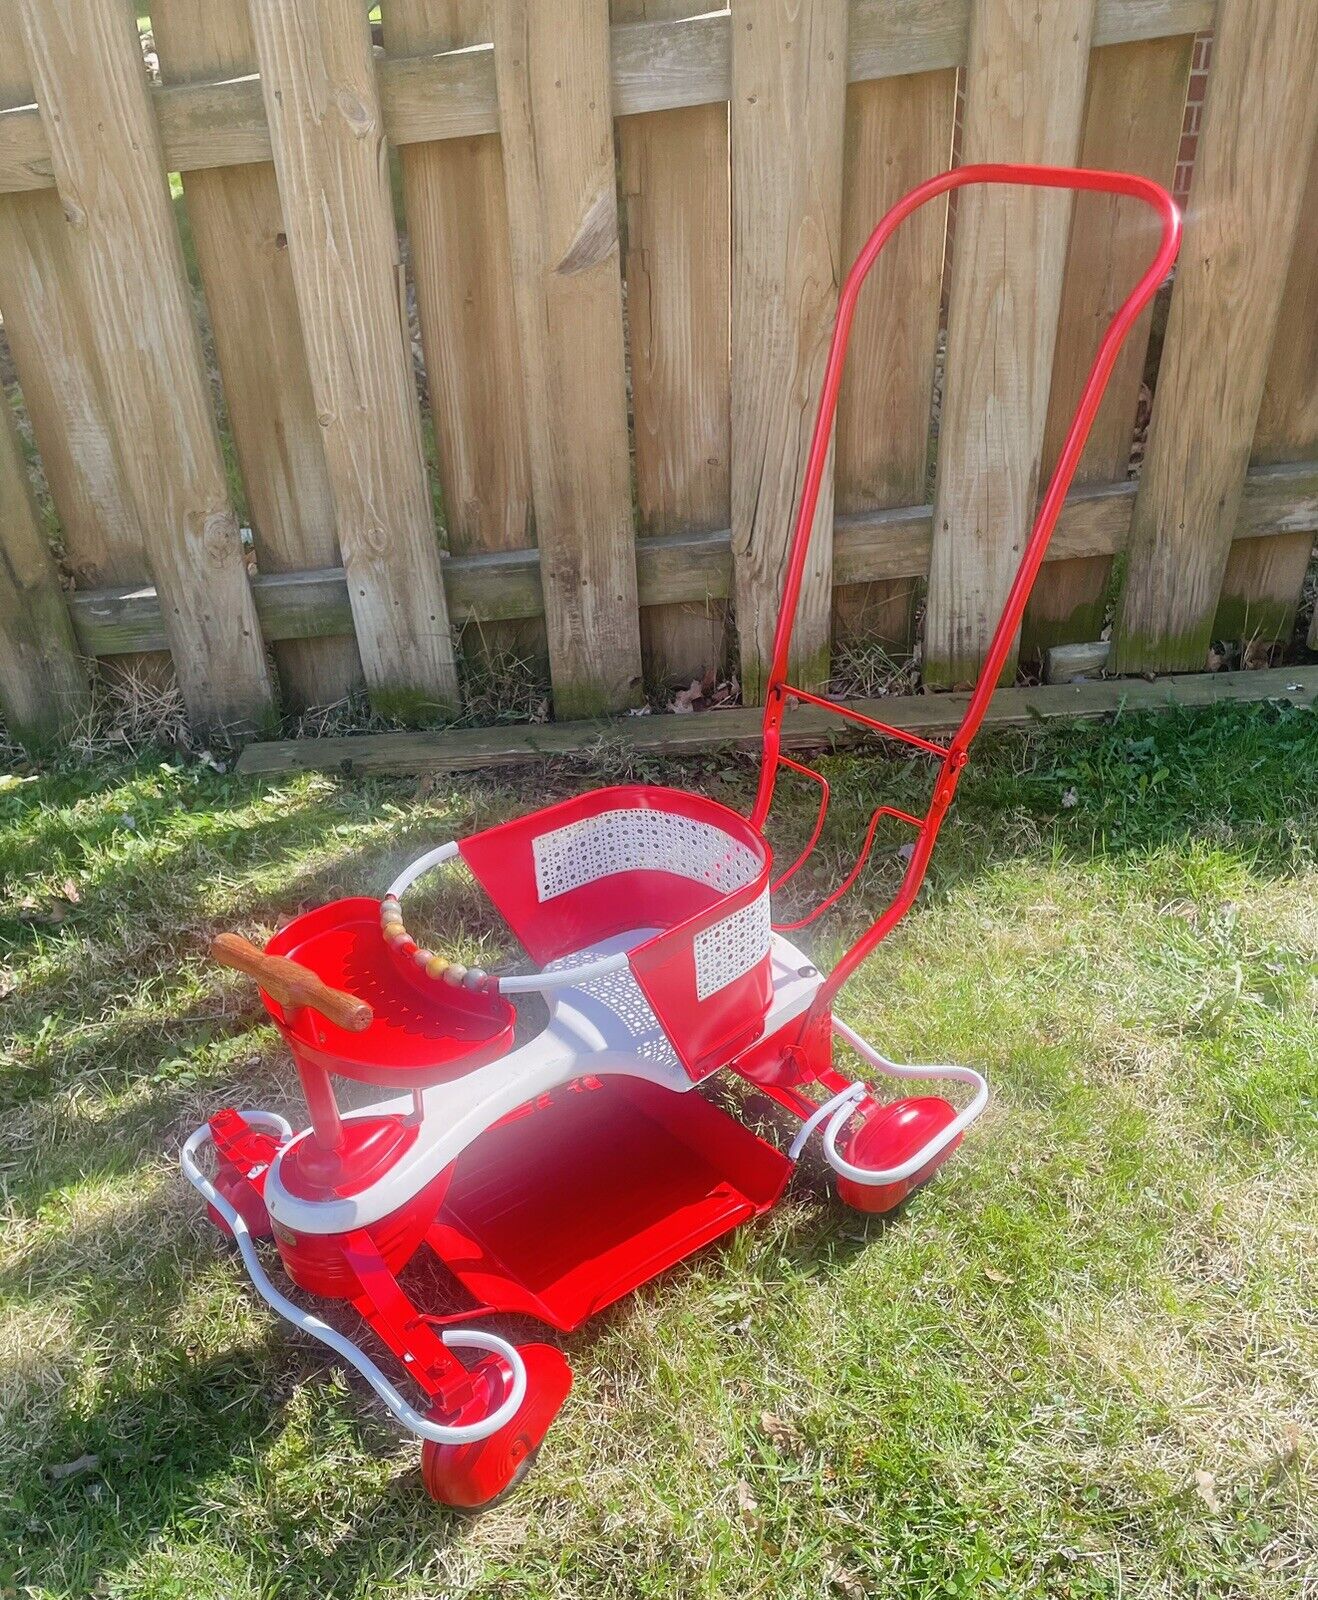 1949 RED TAYLOR TOT Stroller/Walker All Original Completely Repainted Awesome